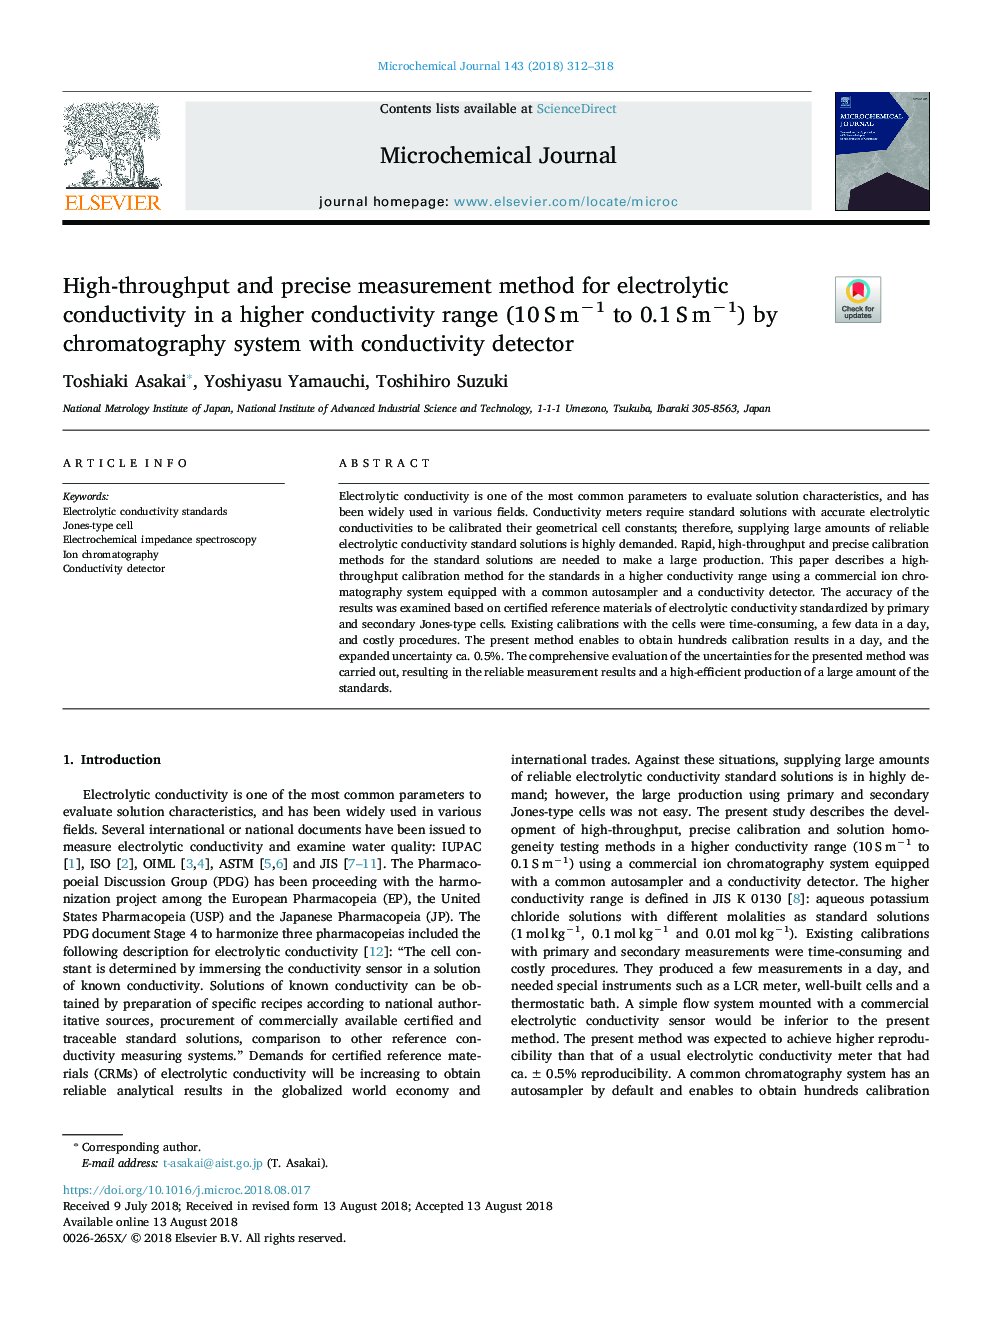 High-throughput and precise measurement method for electrolytic conductivity in a higher conductivity range (10â¯Sâ¯mâ1 to 0.1â¯Sâ¯mâ1) by chromatography system with conductivity detector